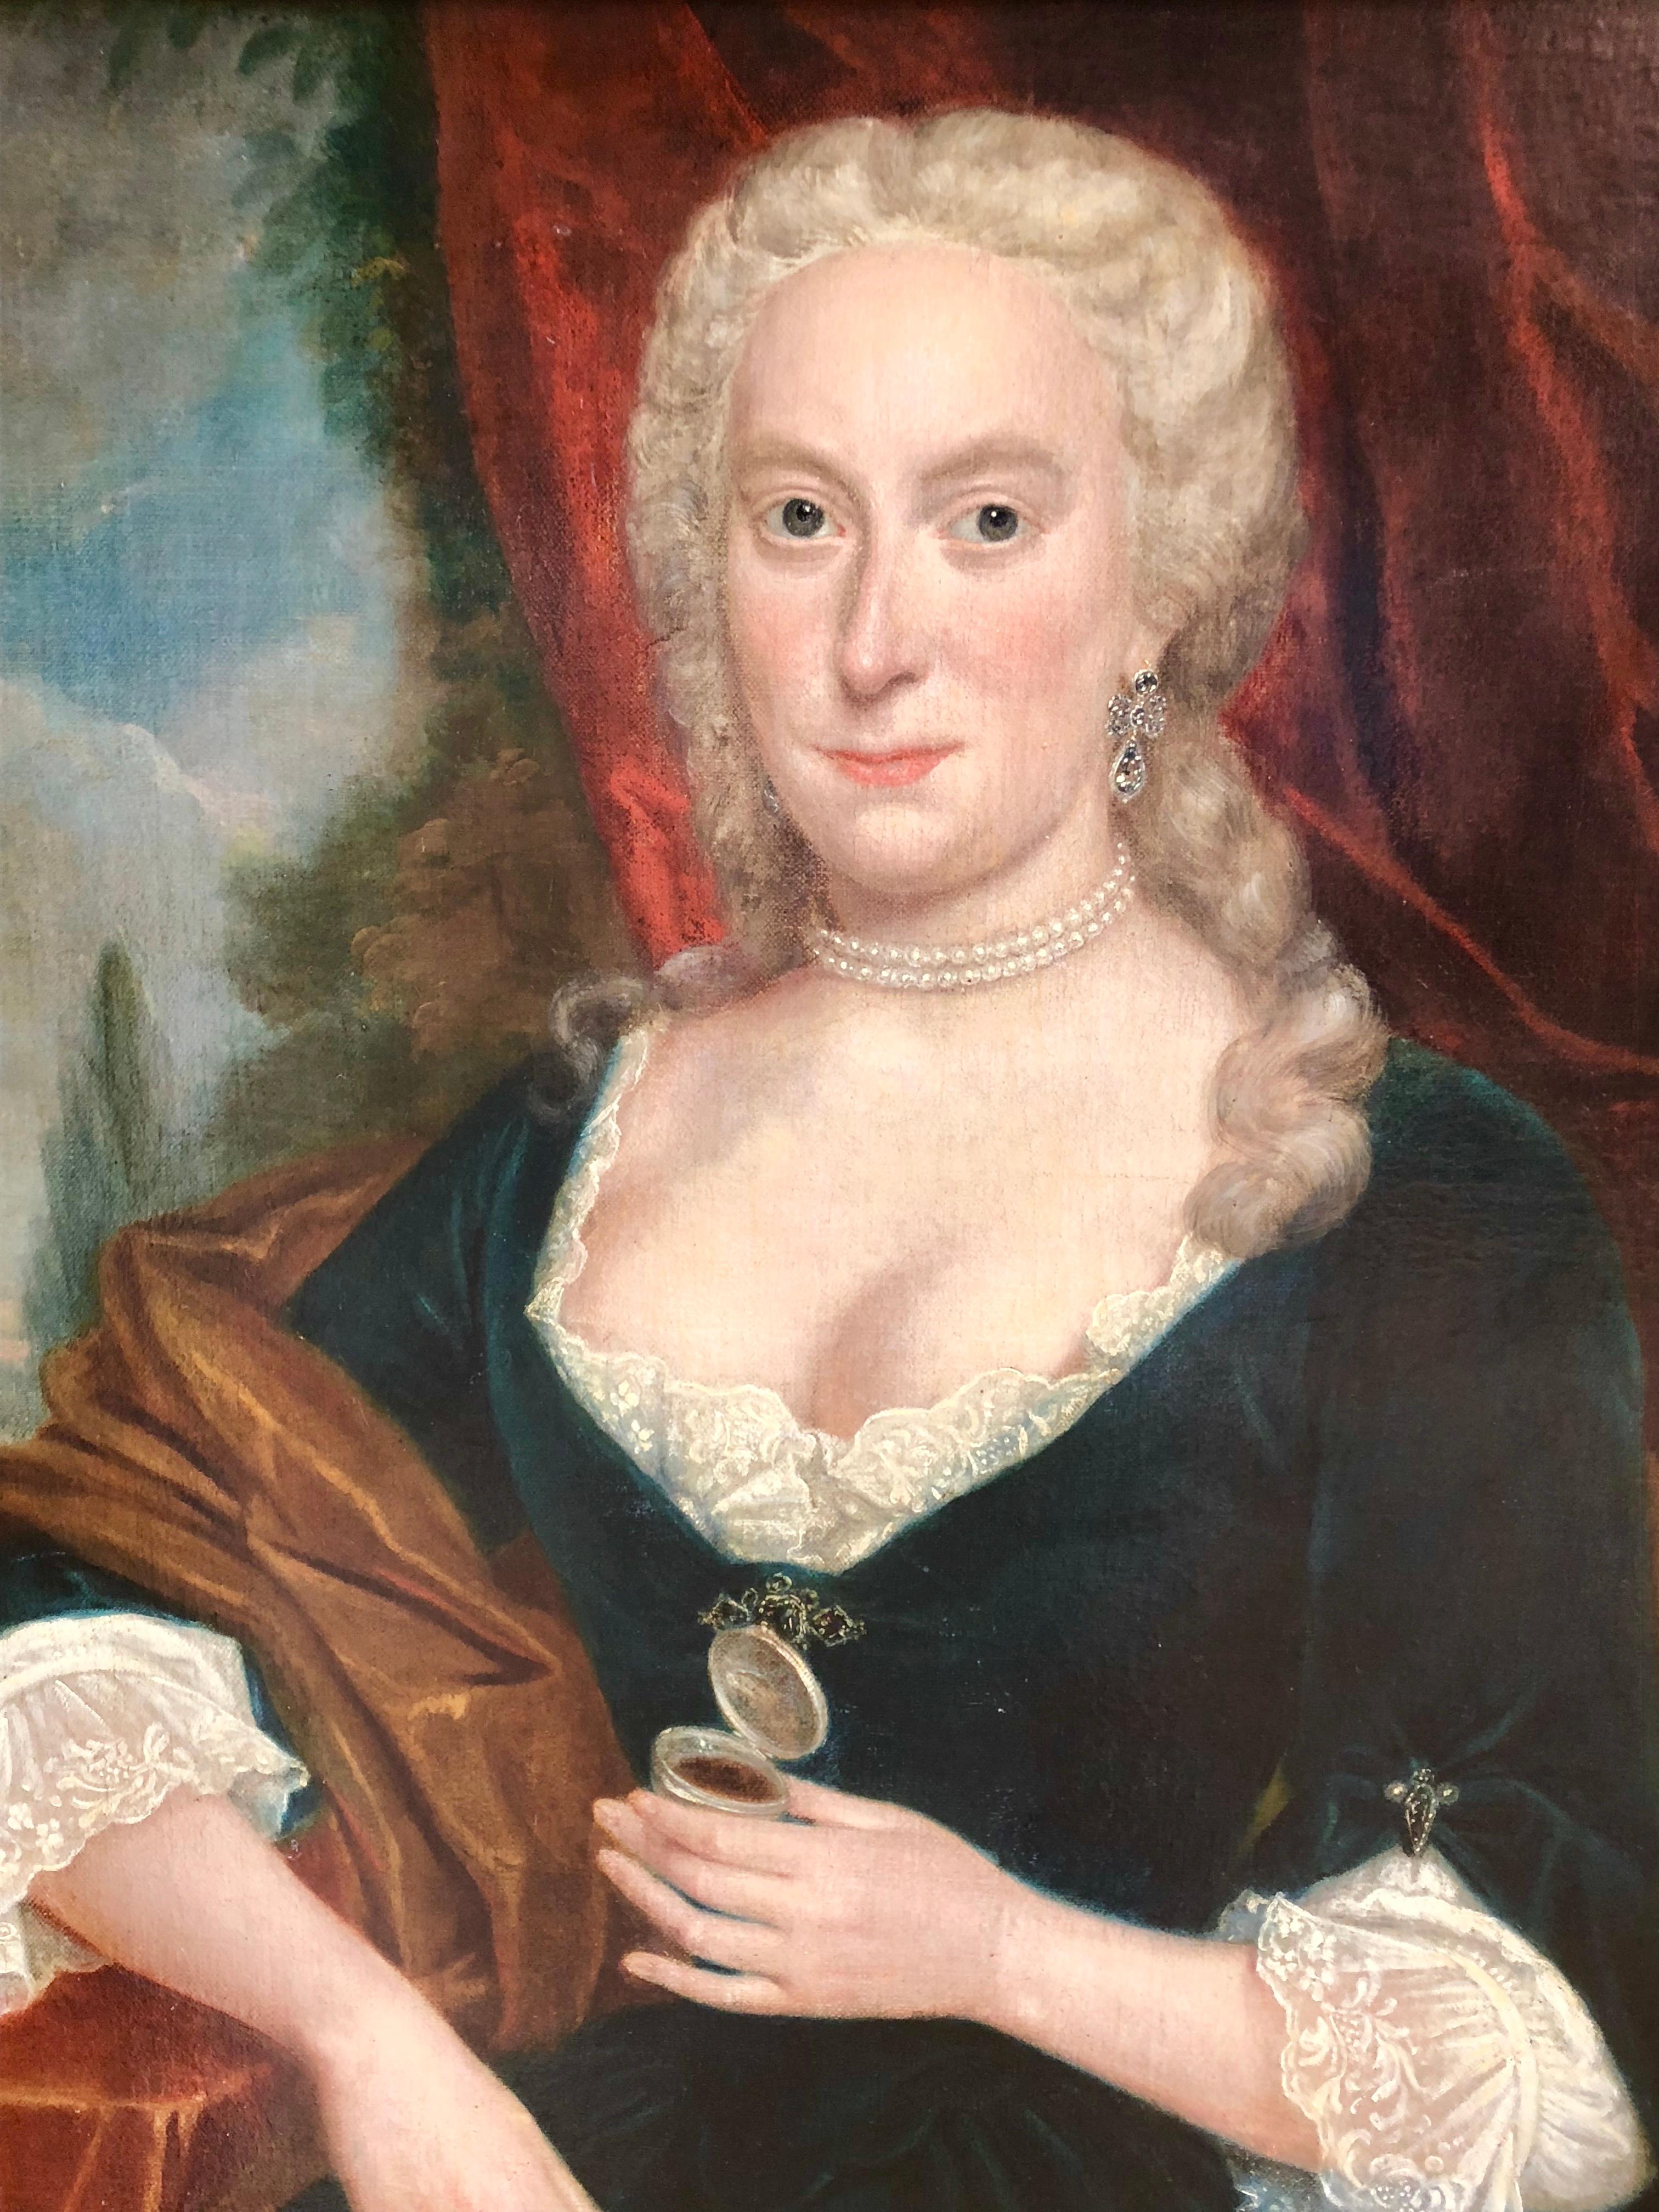 An 18th century oil-on-canvas portrait of a Lady, attributed to William Hoare (1707-1792) Bath, England, unsigned, with labels verso indicating the painting was loaned by Dr. and Rose Cosla to the Maryhill Museum Of Fine Art and the Crocker Gallery